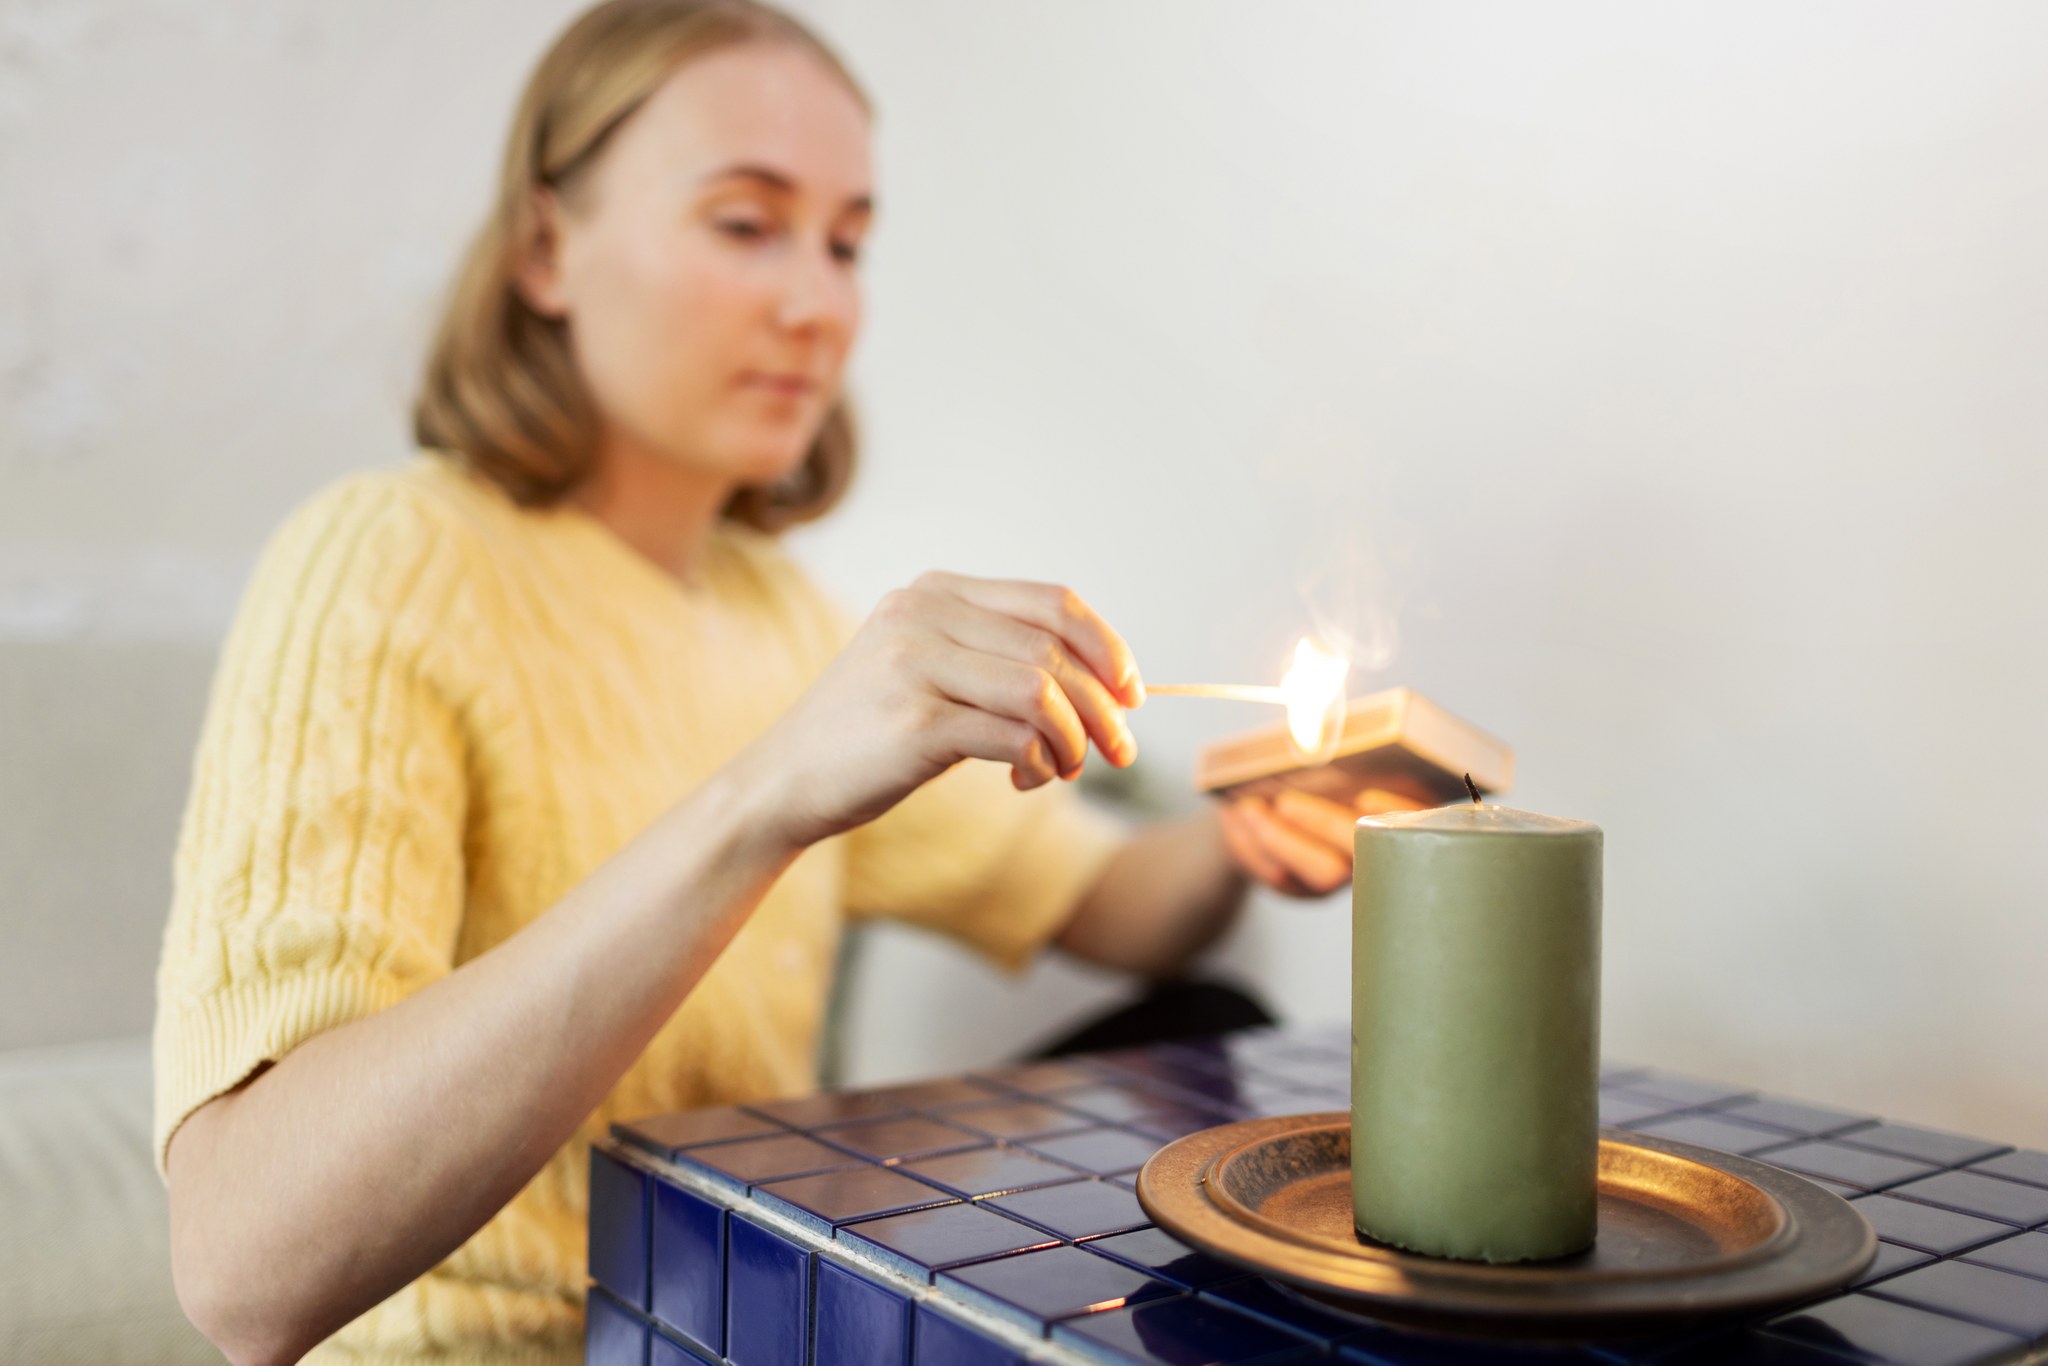 A person lights a candle with a match.